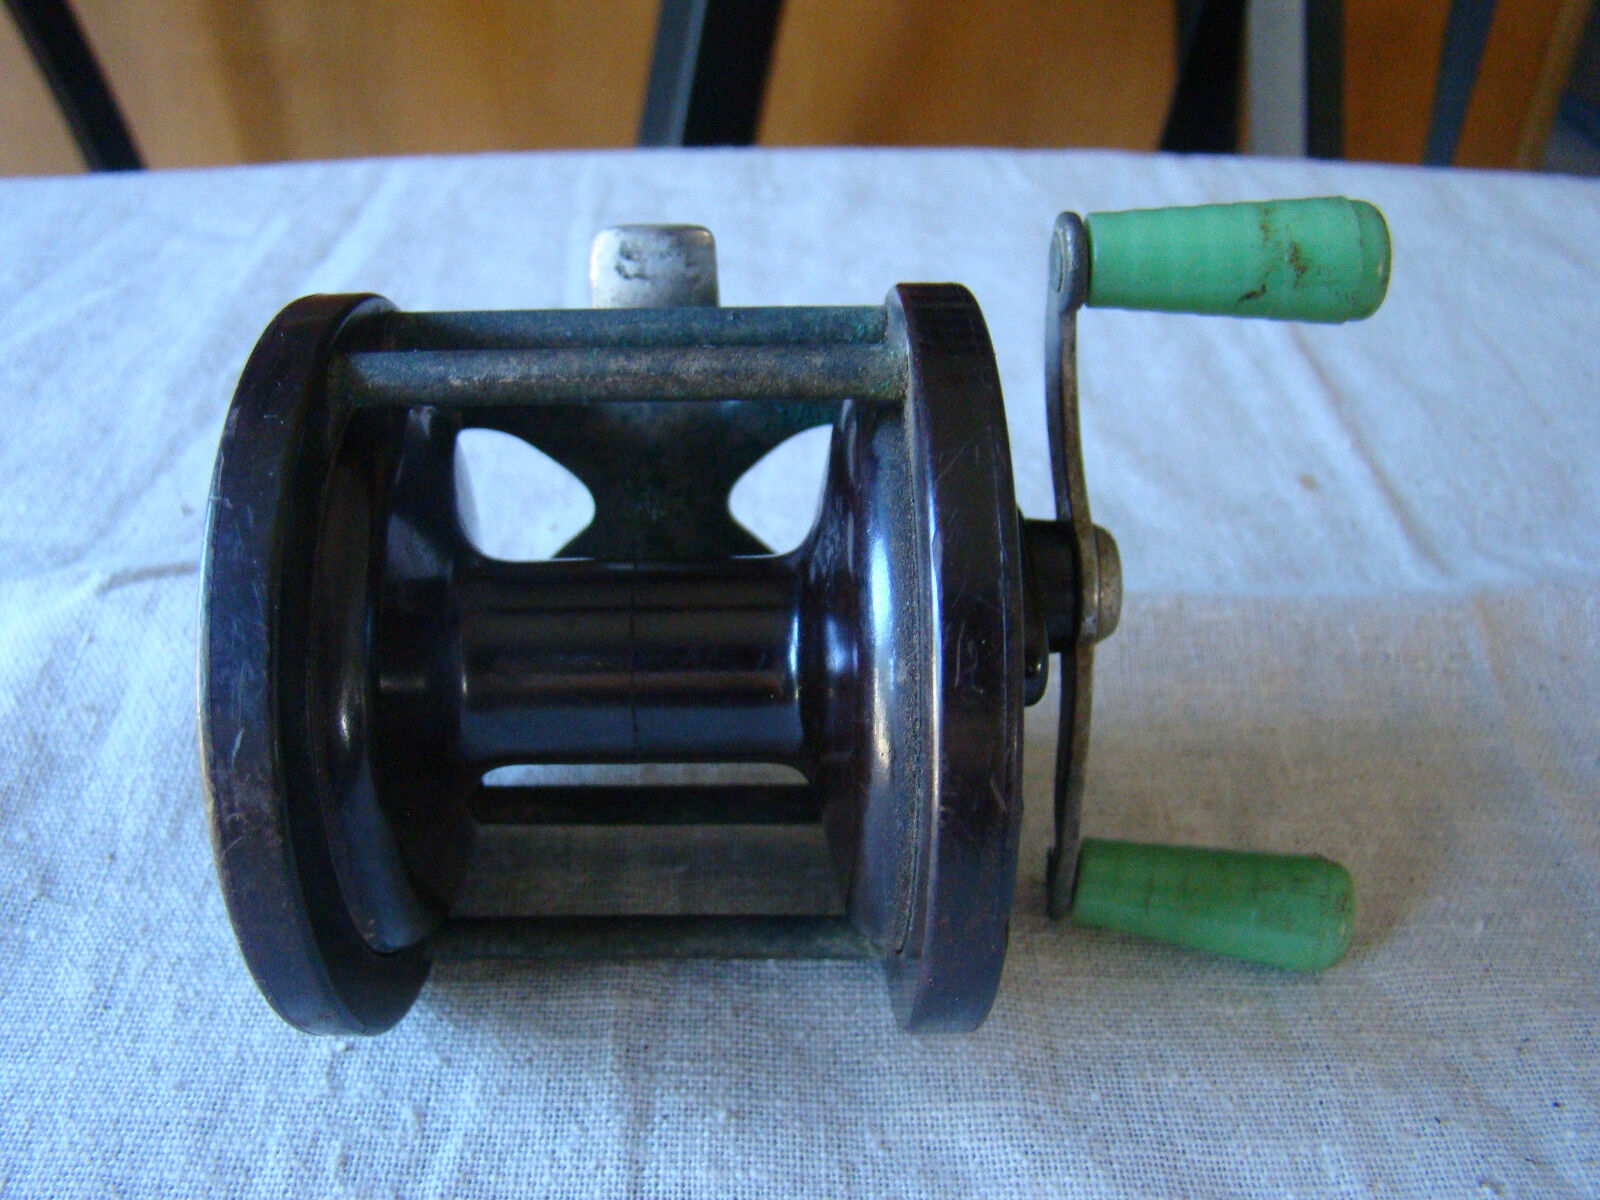  VINTAGE PENN No. 77 FISHING REEL Made in the USA 351524 R